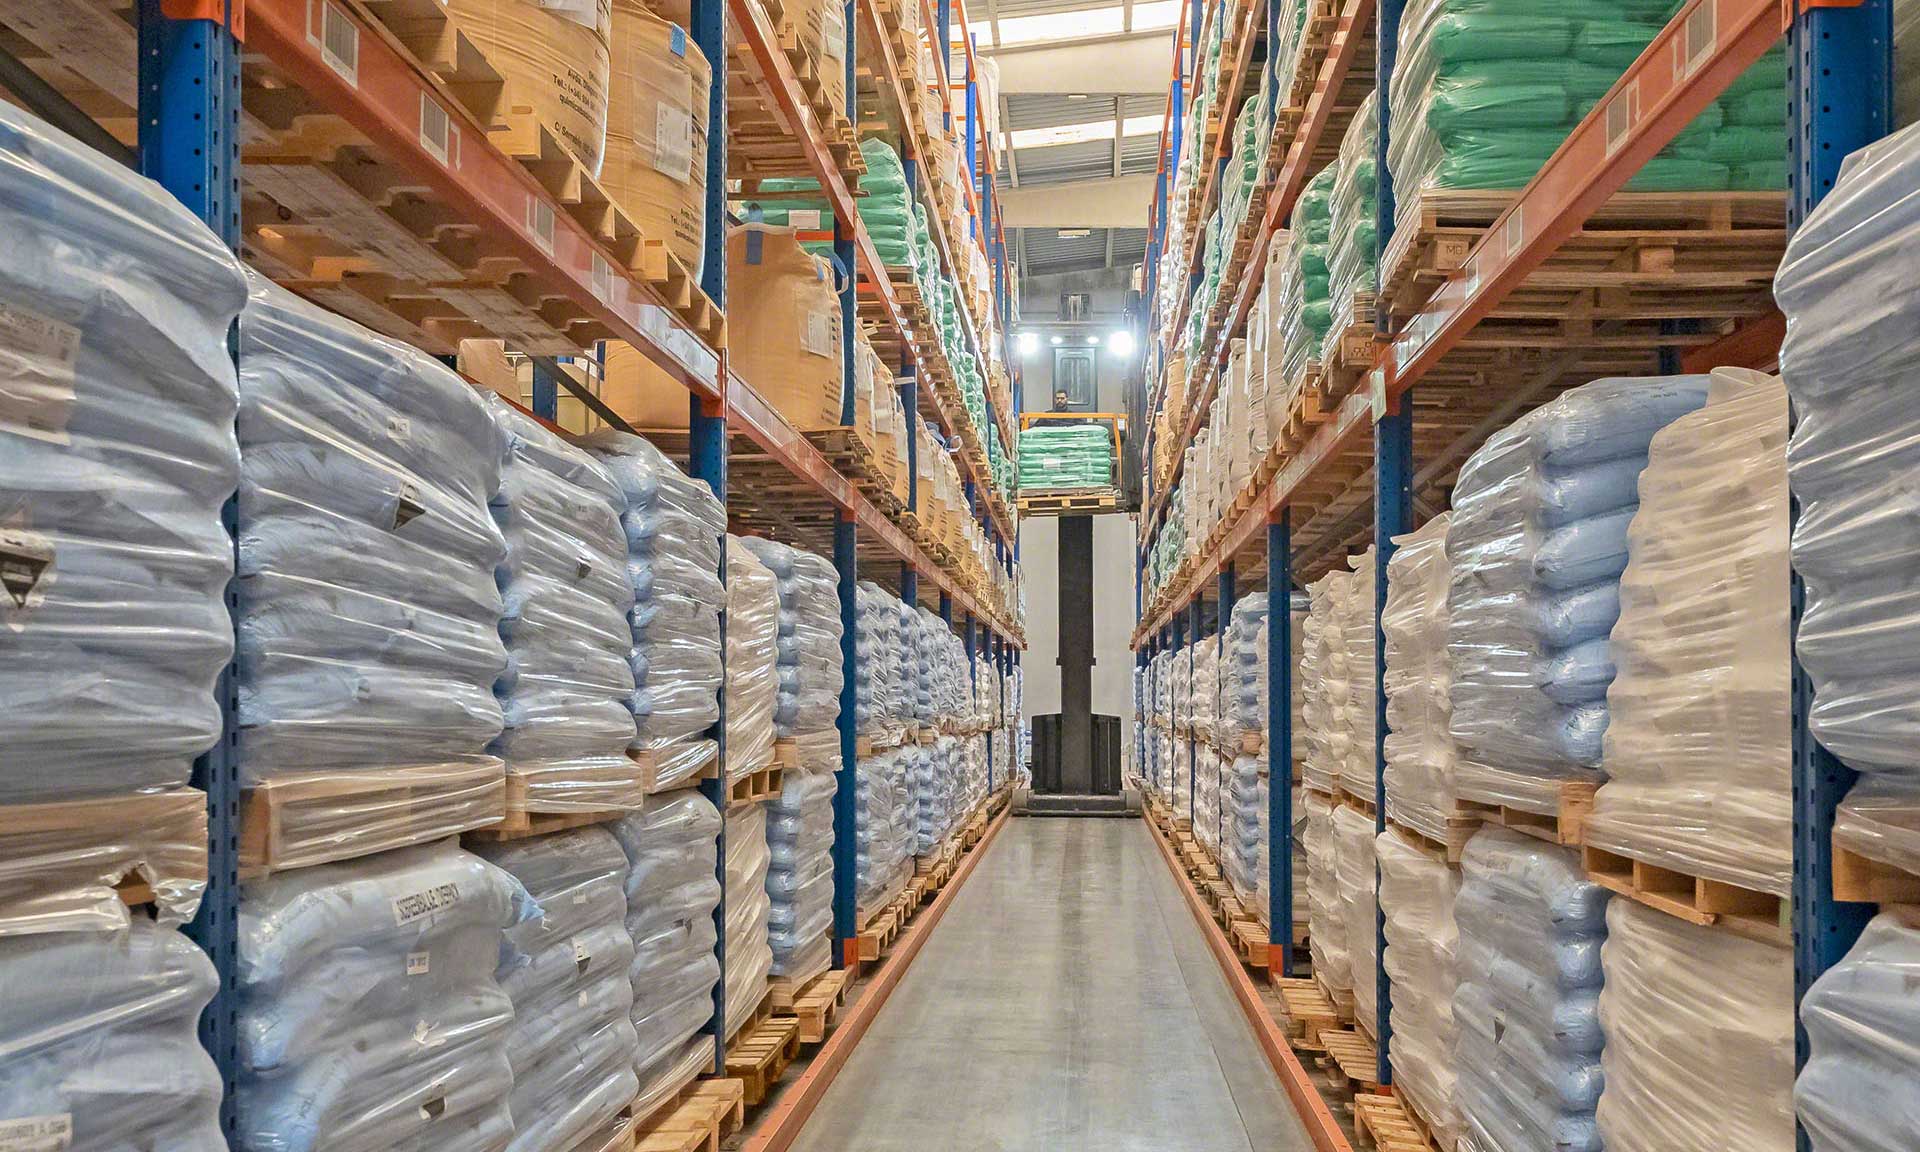 Global-TALKE: zoned warehouse with 1,000+ chemical SKUs